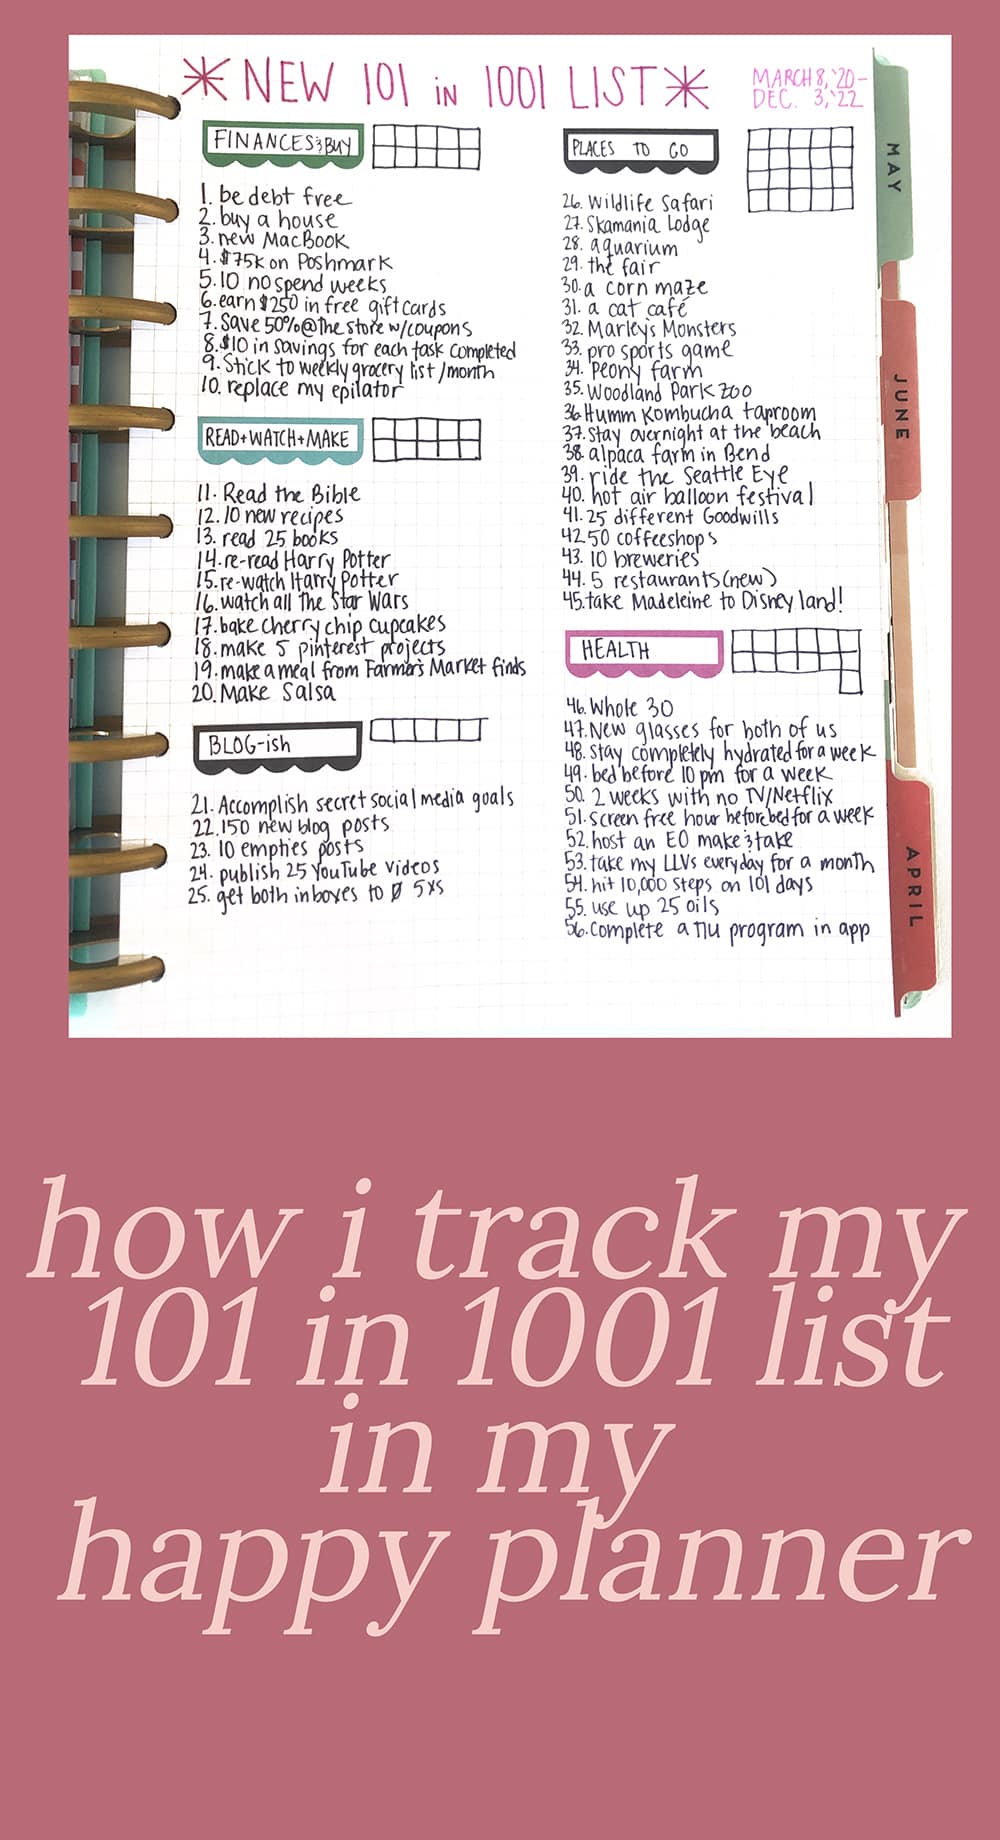 how i track my 101 in 1001 list in my happy planner